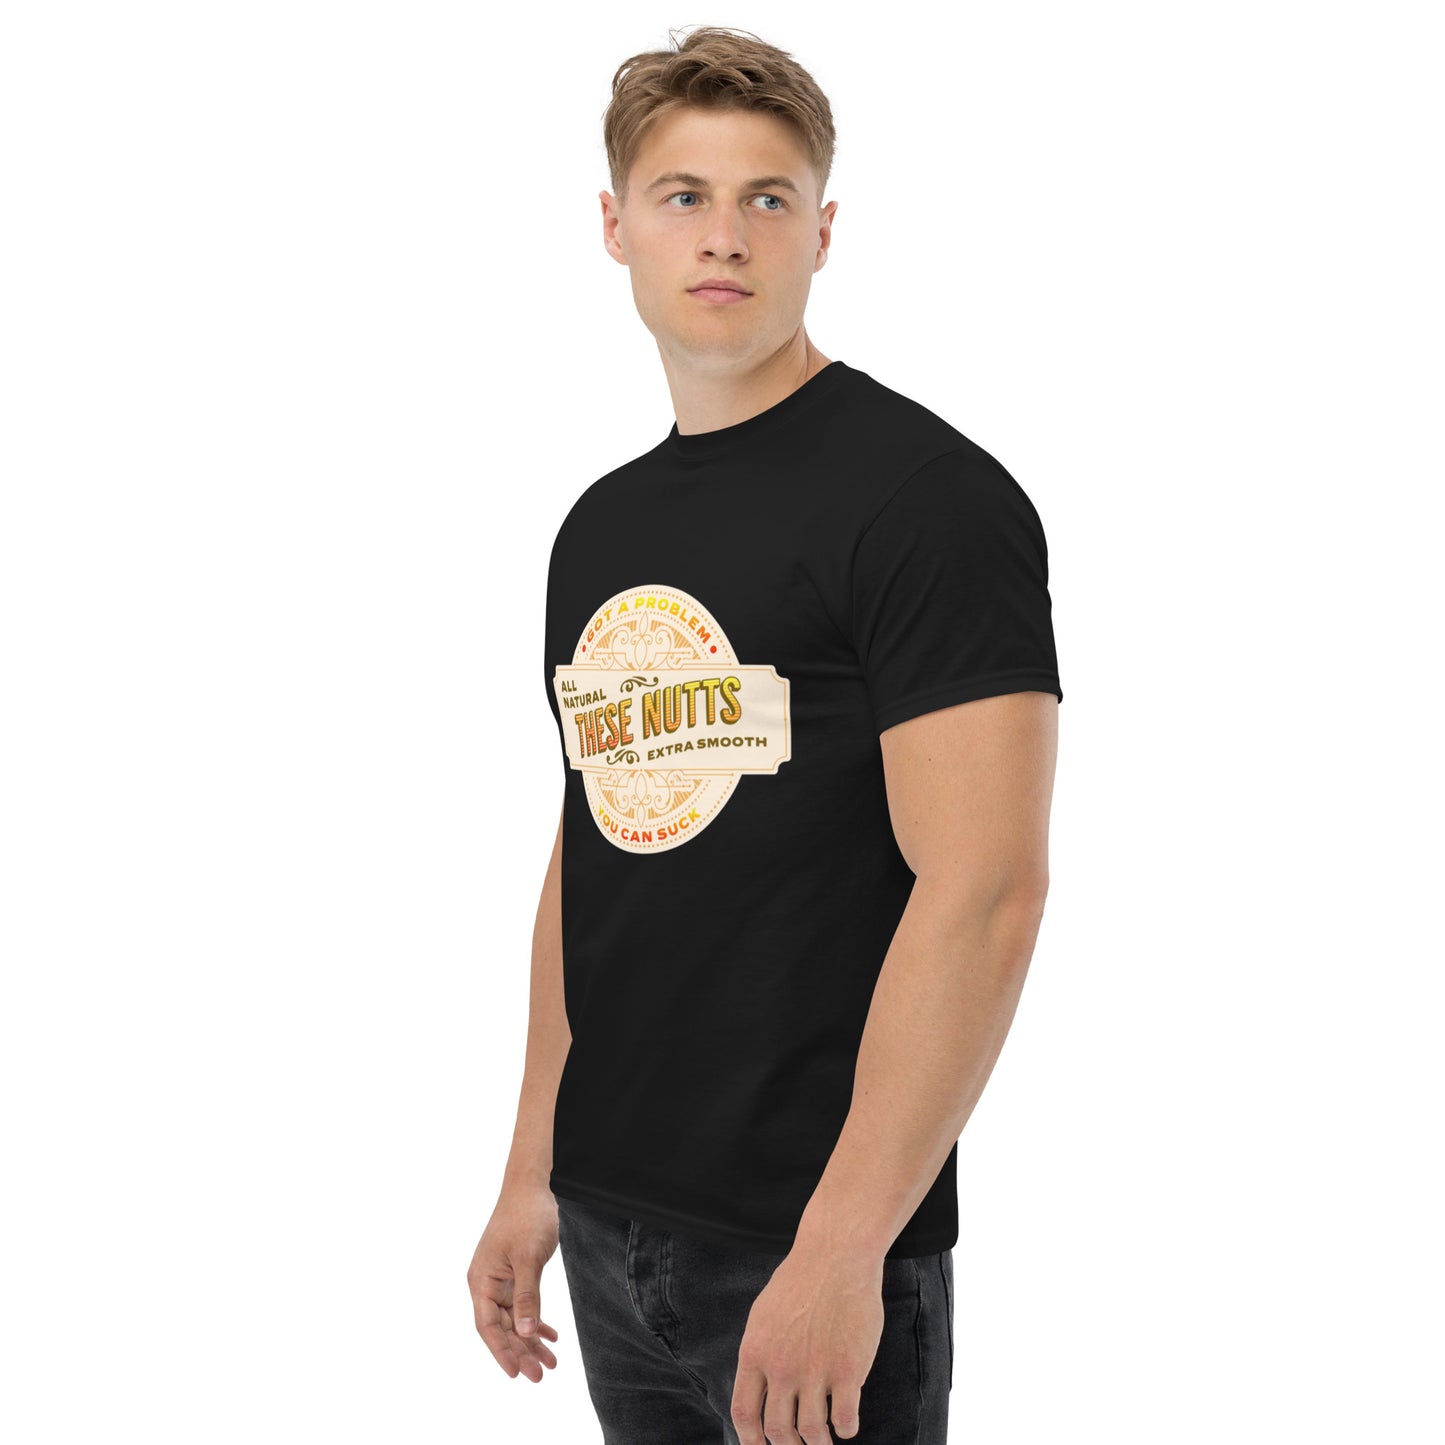 these nutts Unisex classic tee